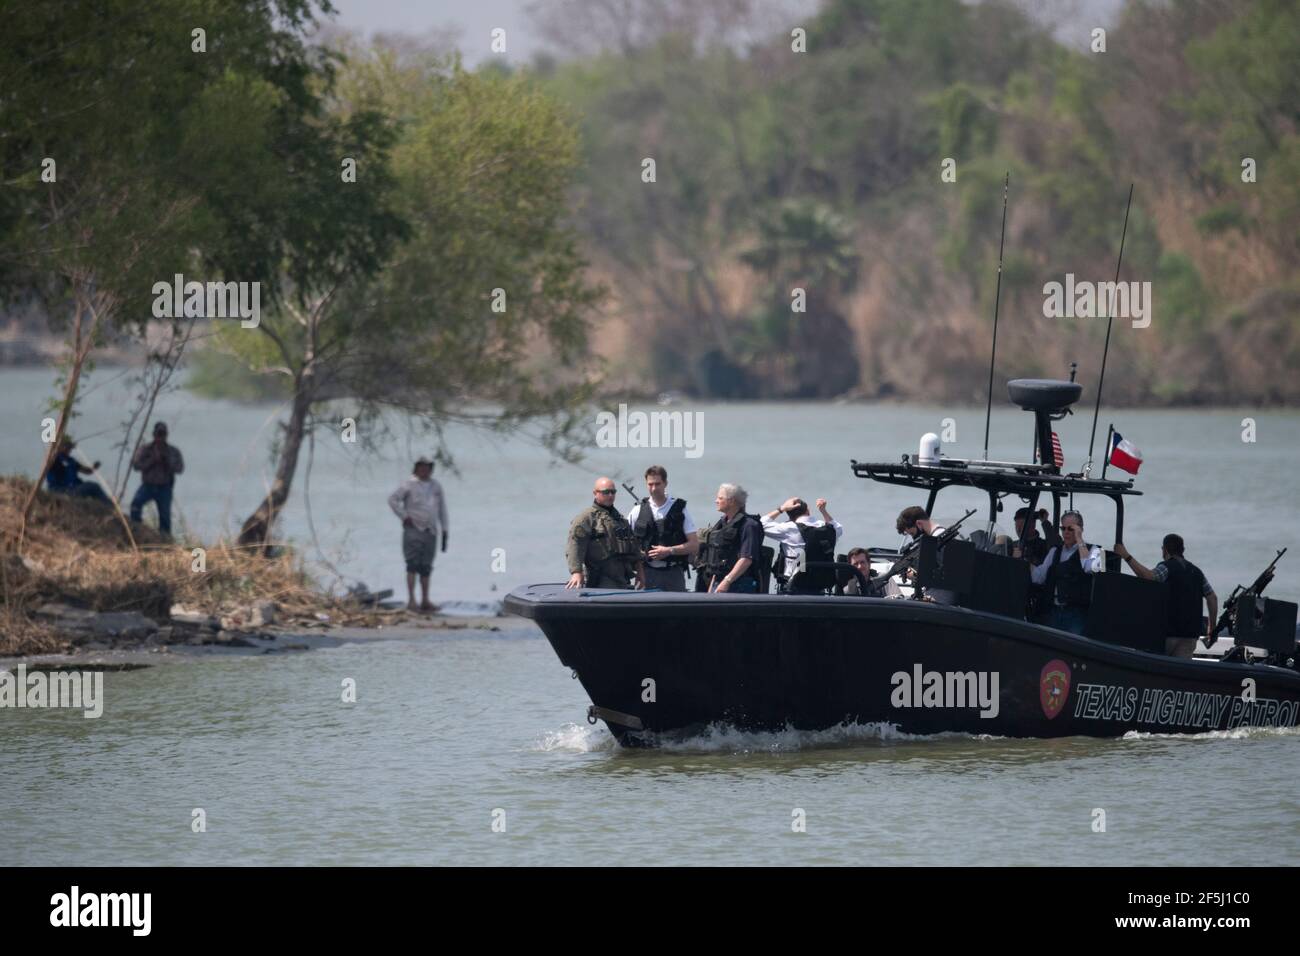 Granjeno, Texas USA, 26th Mar, 2021. With Mexico in the background, a delegation of Republican senators ride on the Rio Grande River south of Mission in a heavily armed Texas Dept. of Public Safety gunboat. During their whirlwind tour of south Texas, the 18 senators saw an overcrowded migrant processing center in Donna and a corpse floating in the river north of Anzalduas Park. Credit: Bob Daemmrich/Alamy Live News Stock Photo